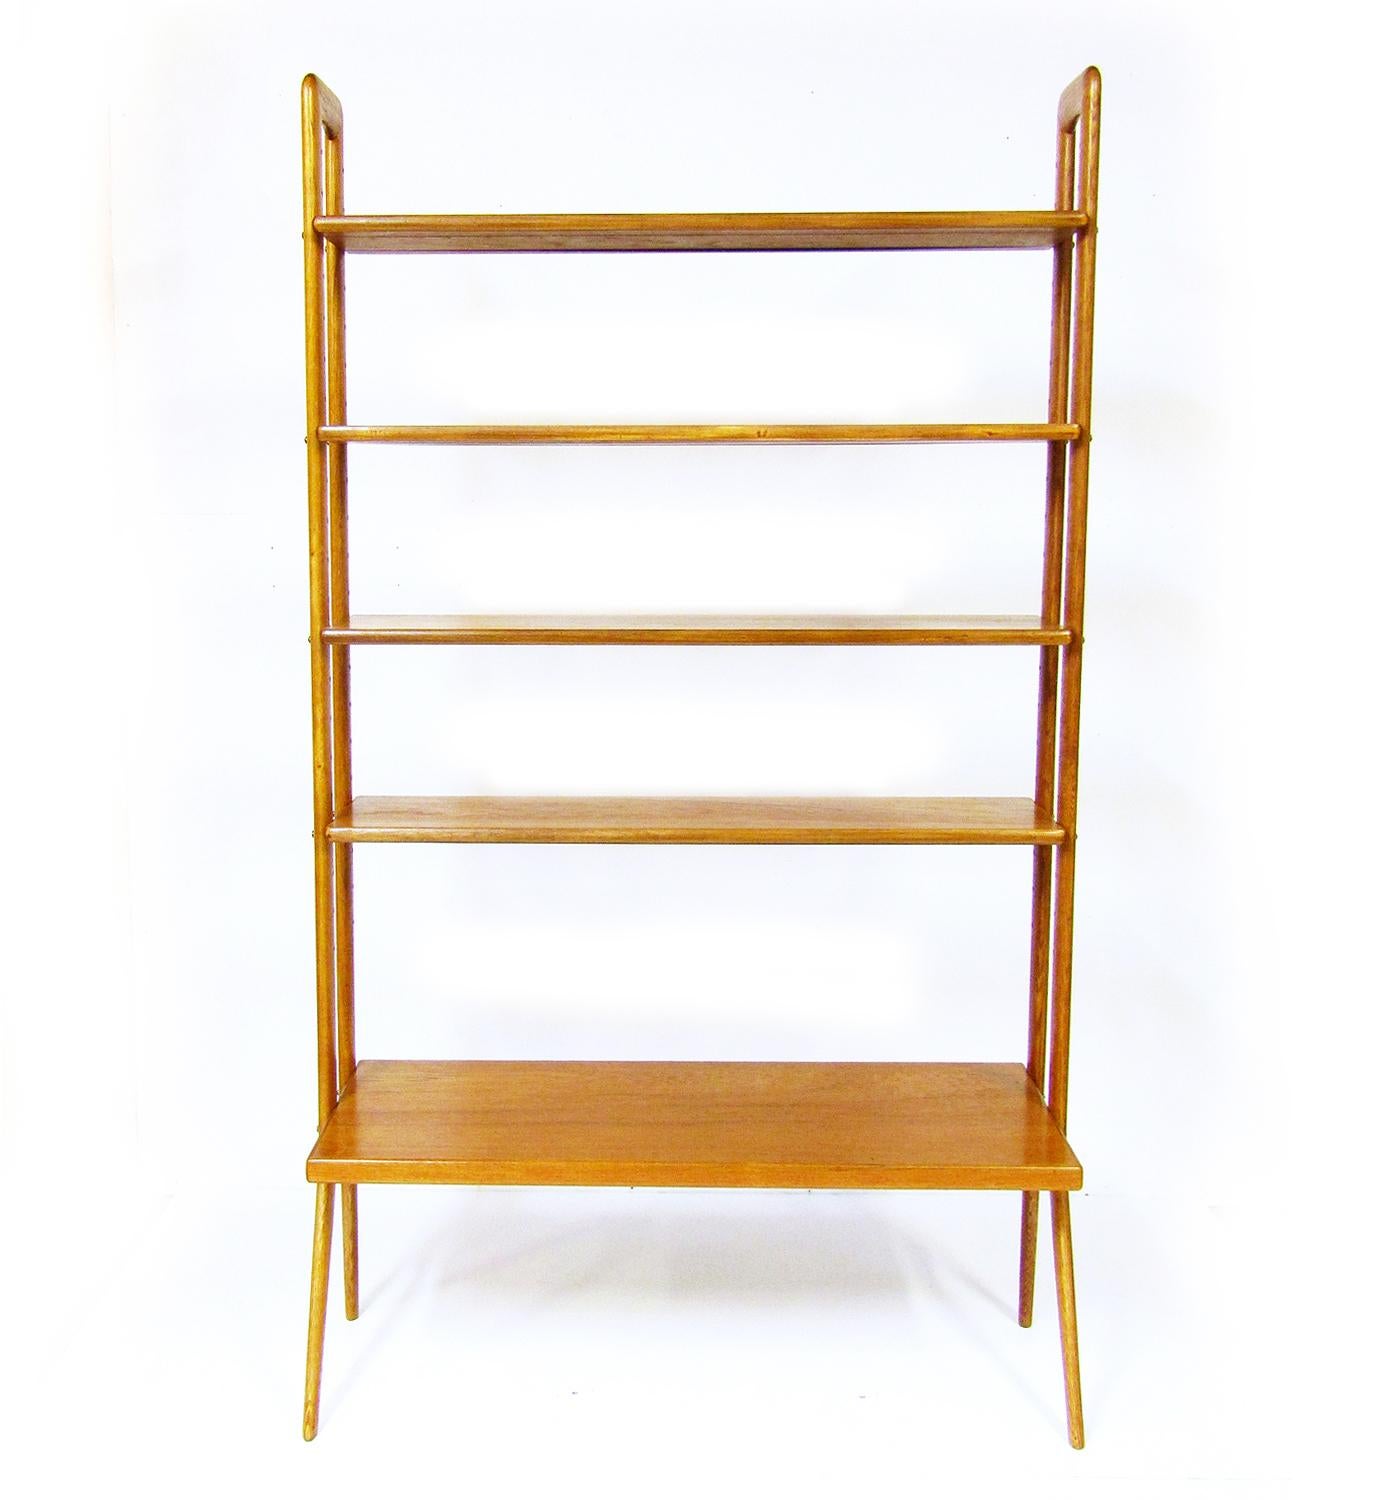 A 1950s Danish bookcase or room divider By Kurt Ostervig for International Designers Group.

The teak shelving contrasts with the oak supports, which are sculpted to angled, tapered legs, redolent of 1950s style.

It is fully adjustable. The